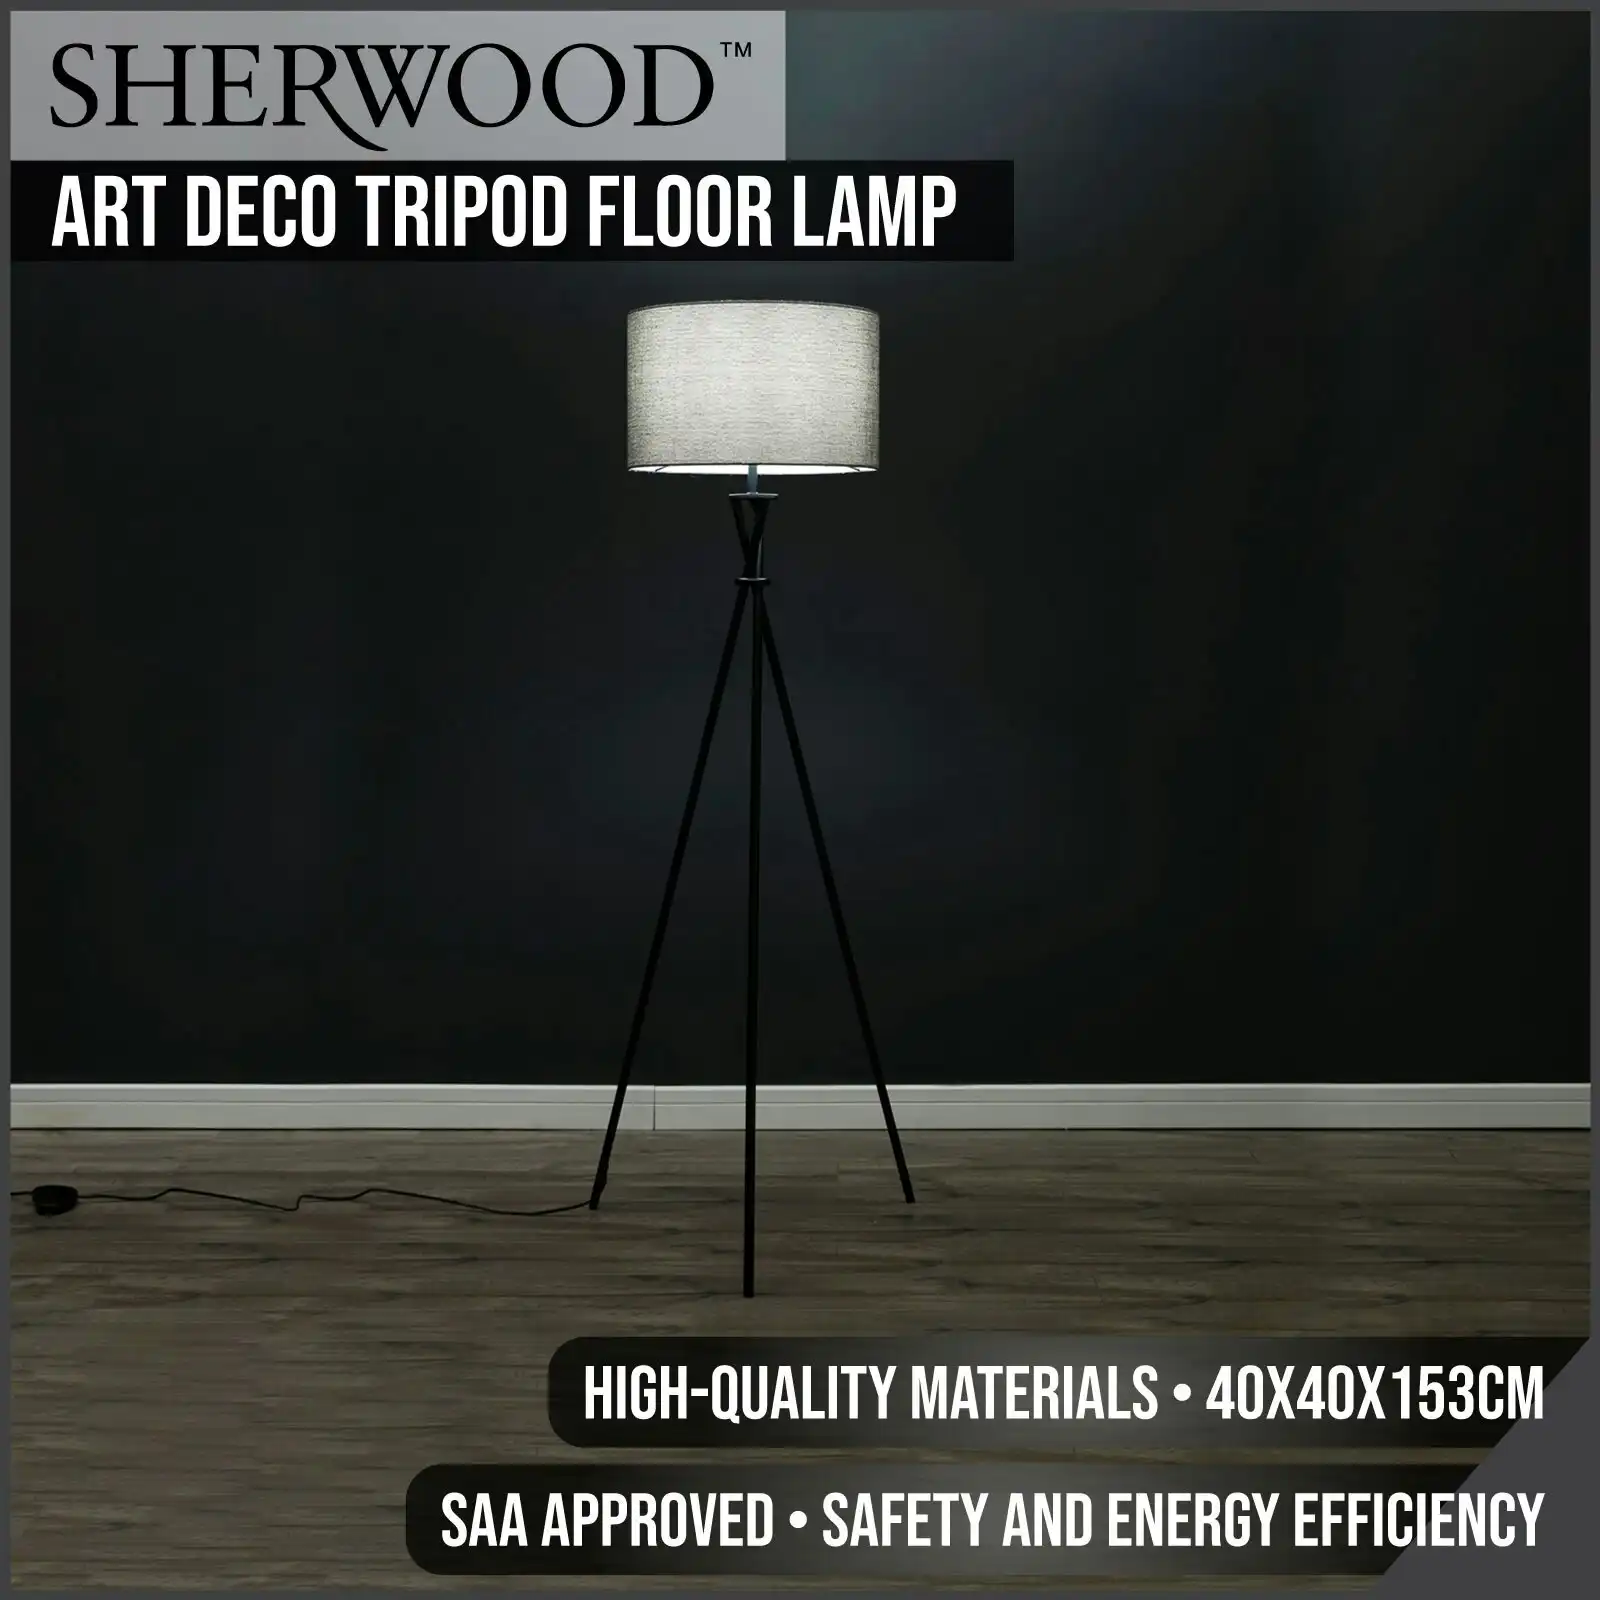 Sherwood Lighting Art Deco Tripod Floor Lamp White Polished Stainless Steel and White